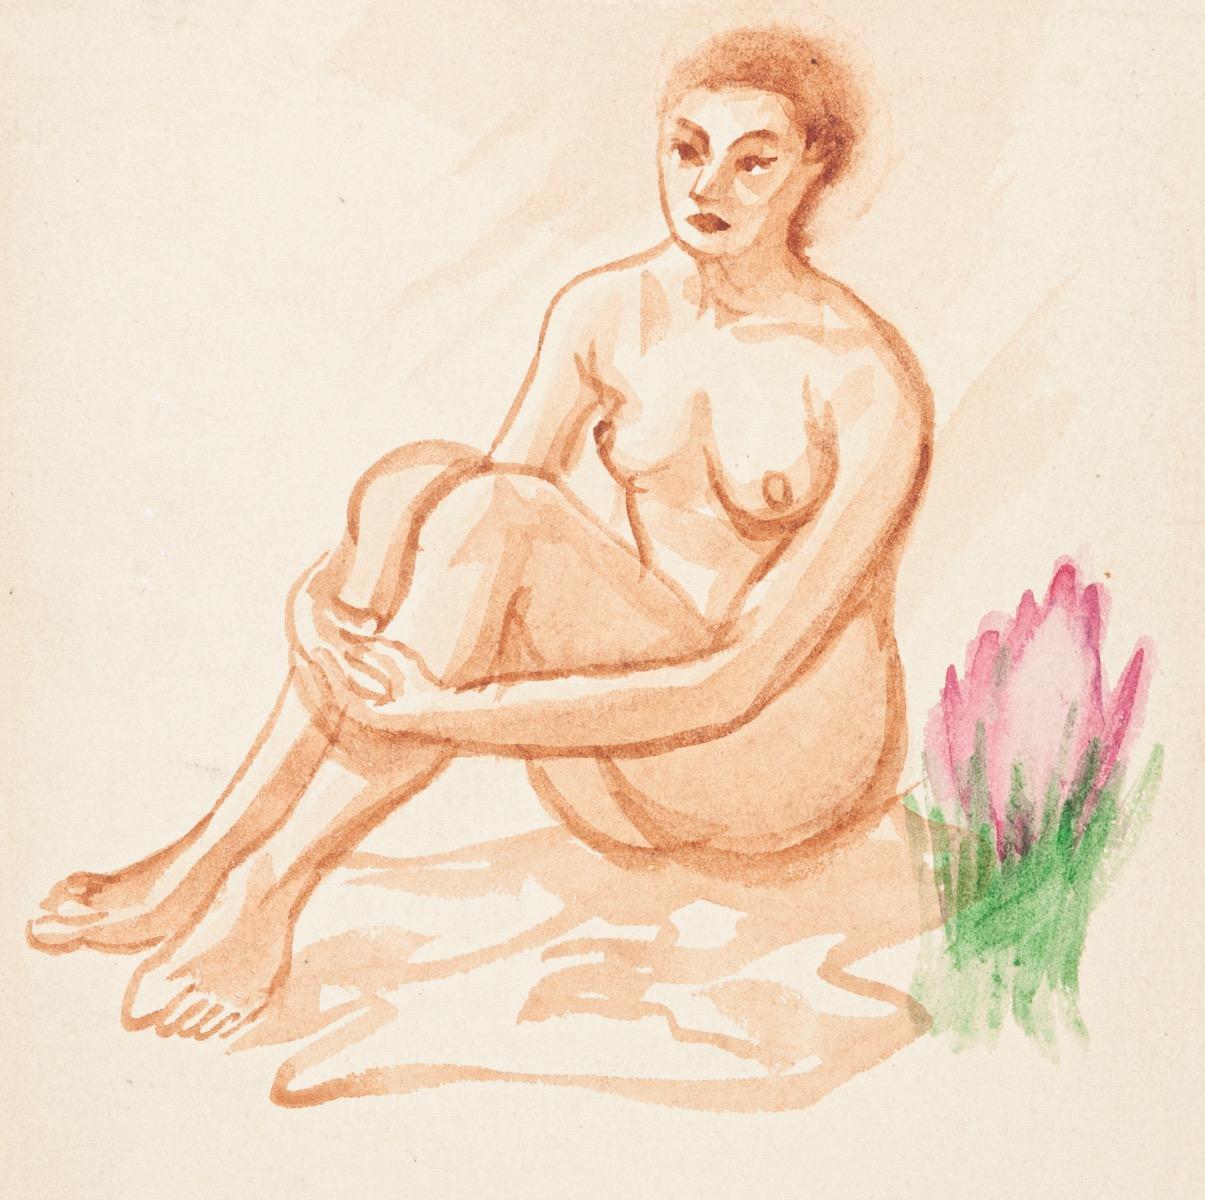 Unknown Figurative Print - Nude - Original Watercolor on Paper - Early 20th Century